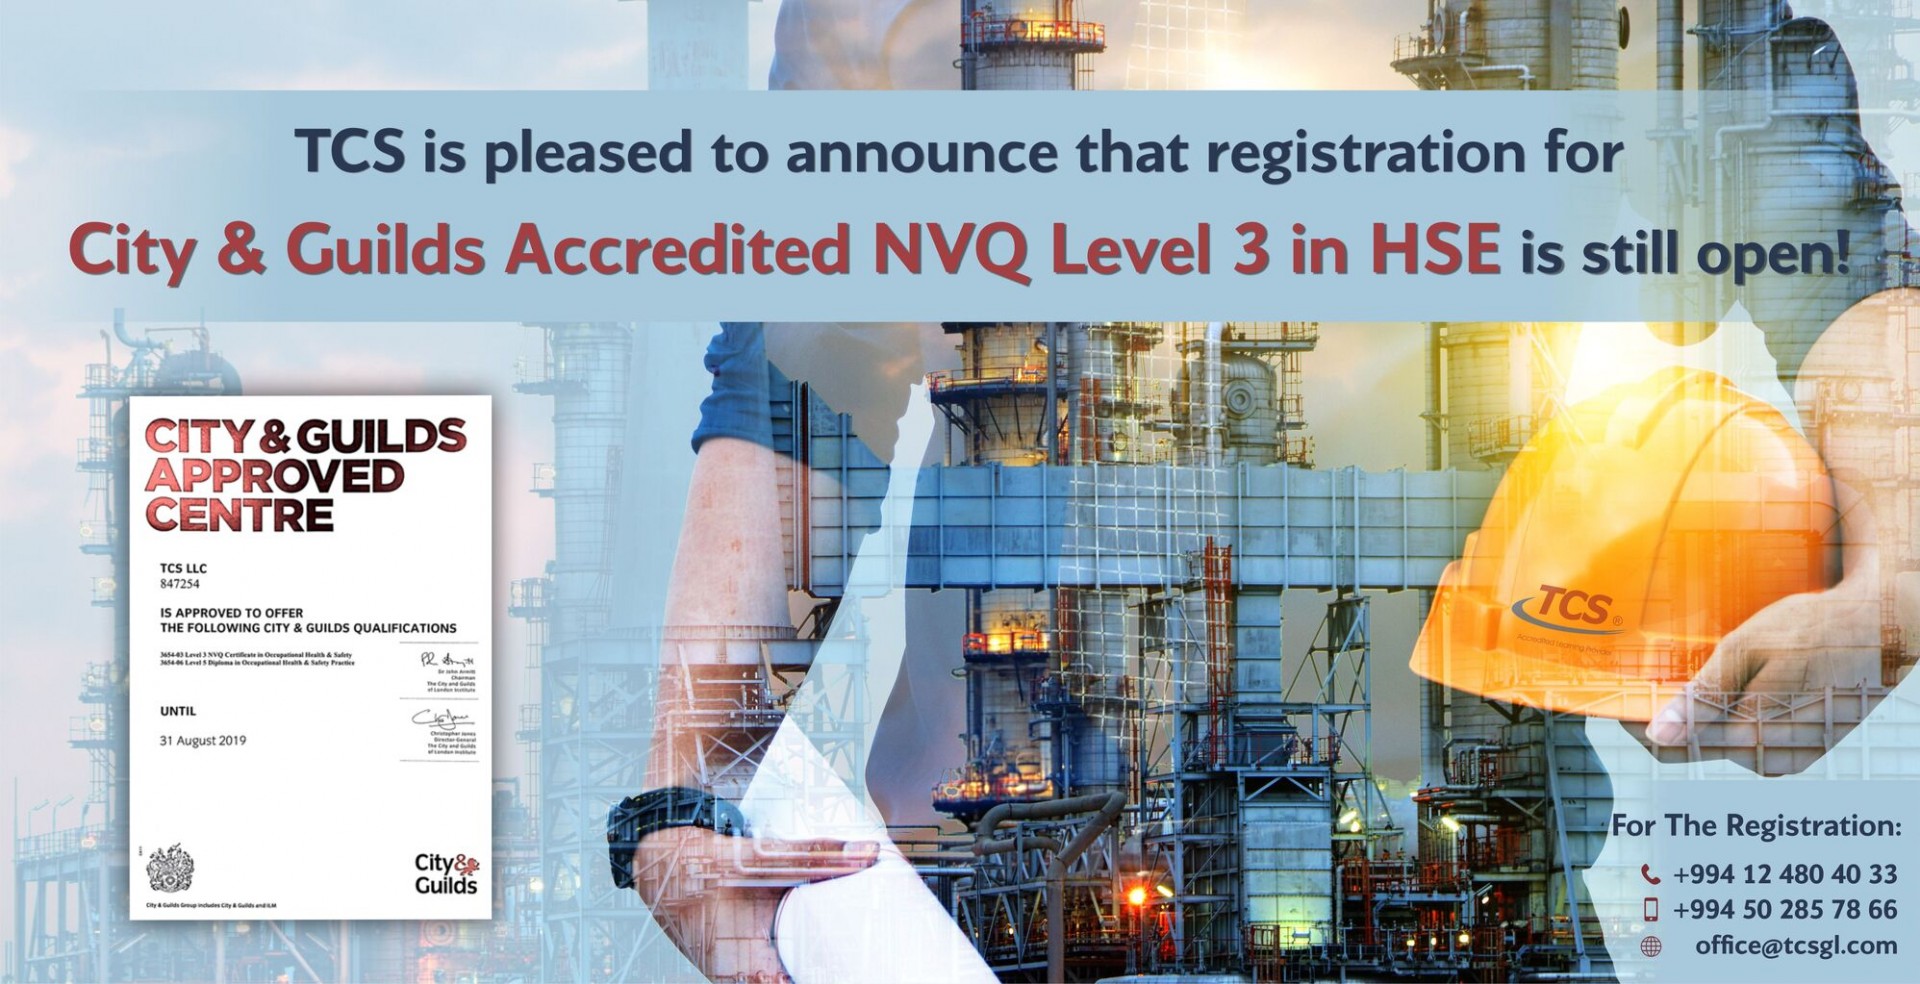 “NVQ Level 3” is now available in Azerbaijani!